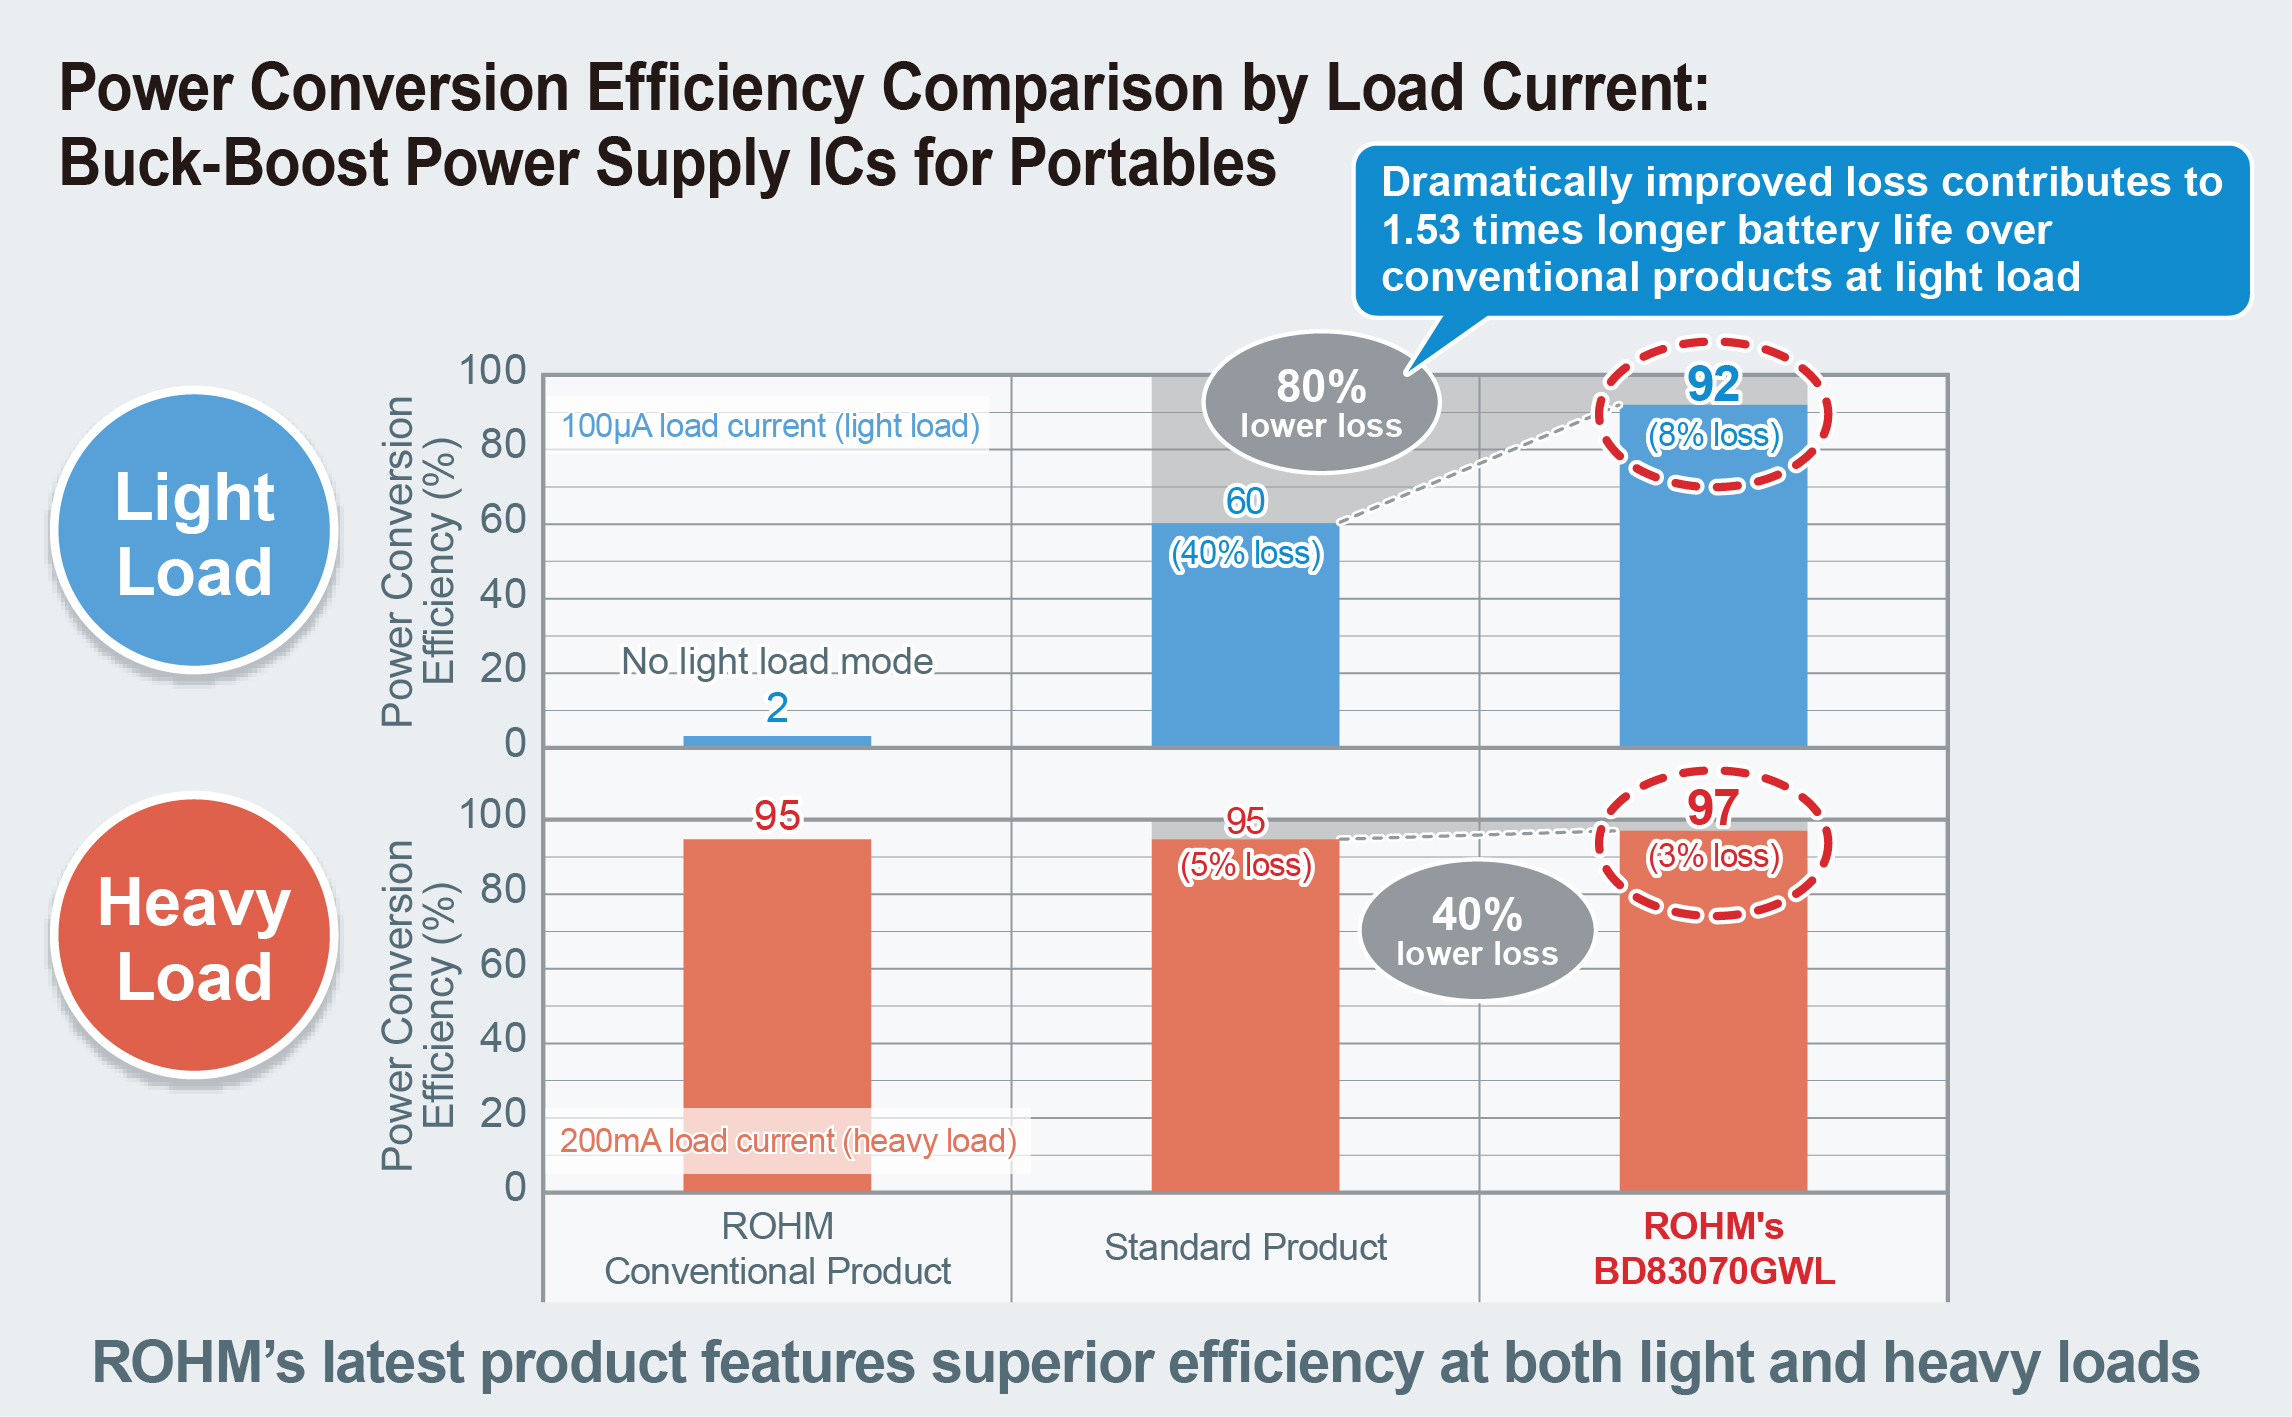 Power Conversion Efficiency Comparison by Load Current: Buck-Boost Supply ICs for Portables